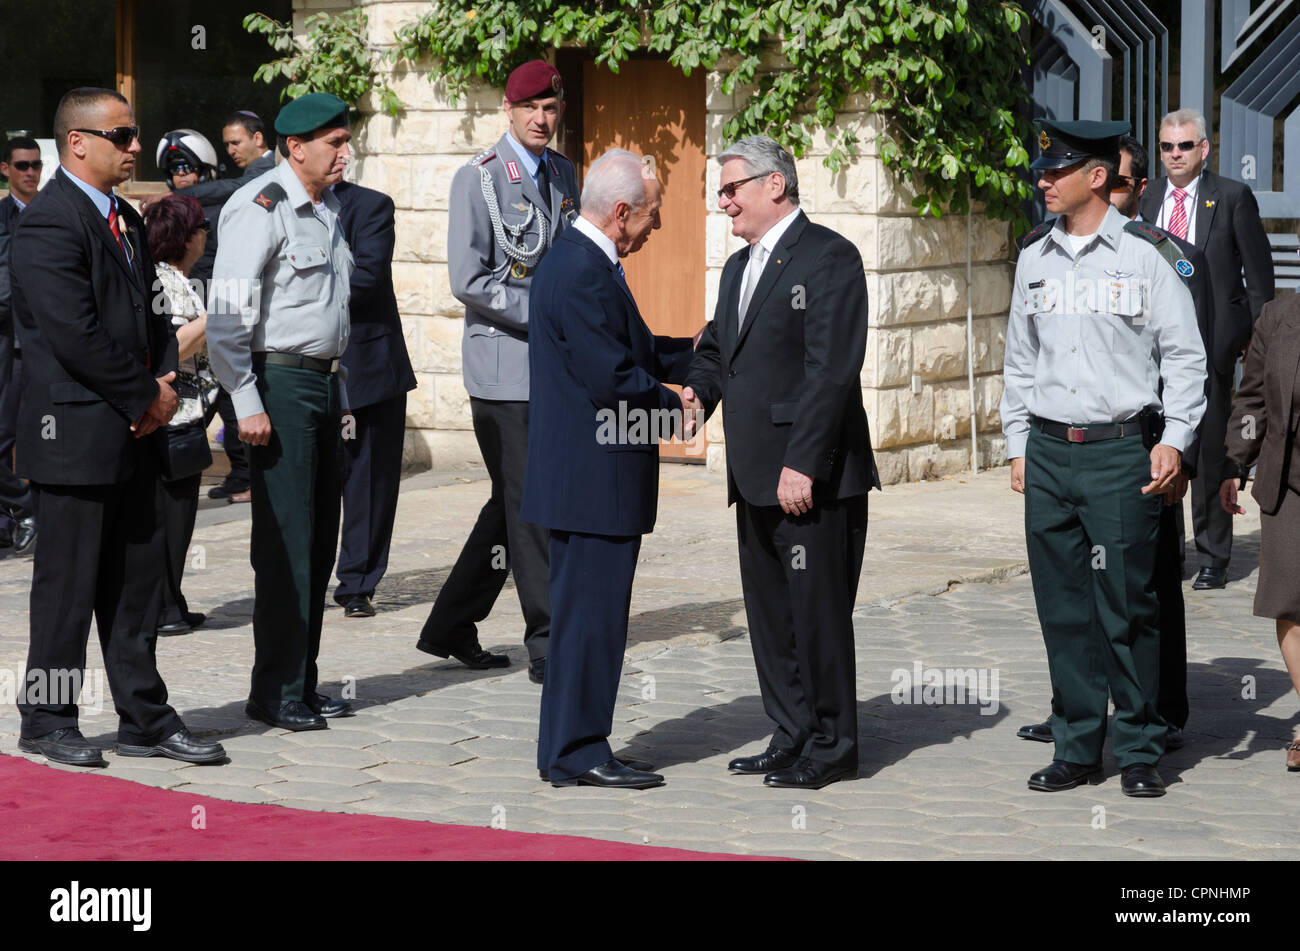 Israeli President Shimon Peres and his German counterpart Joachim Gauck review a military honour guard during a welcom ceremony Stock Photo